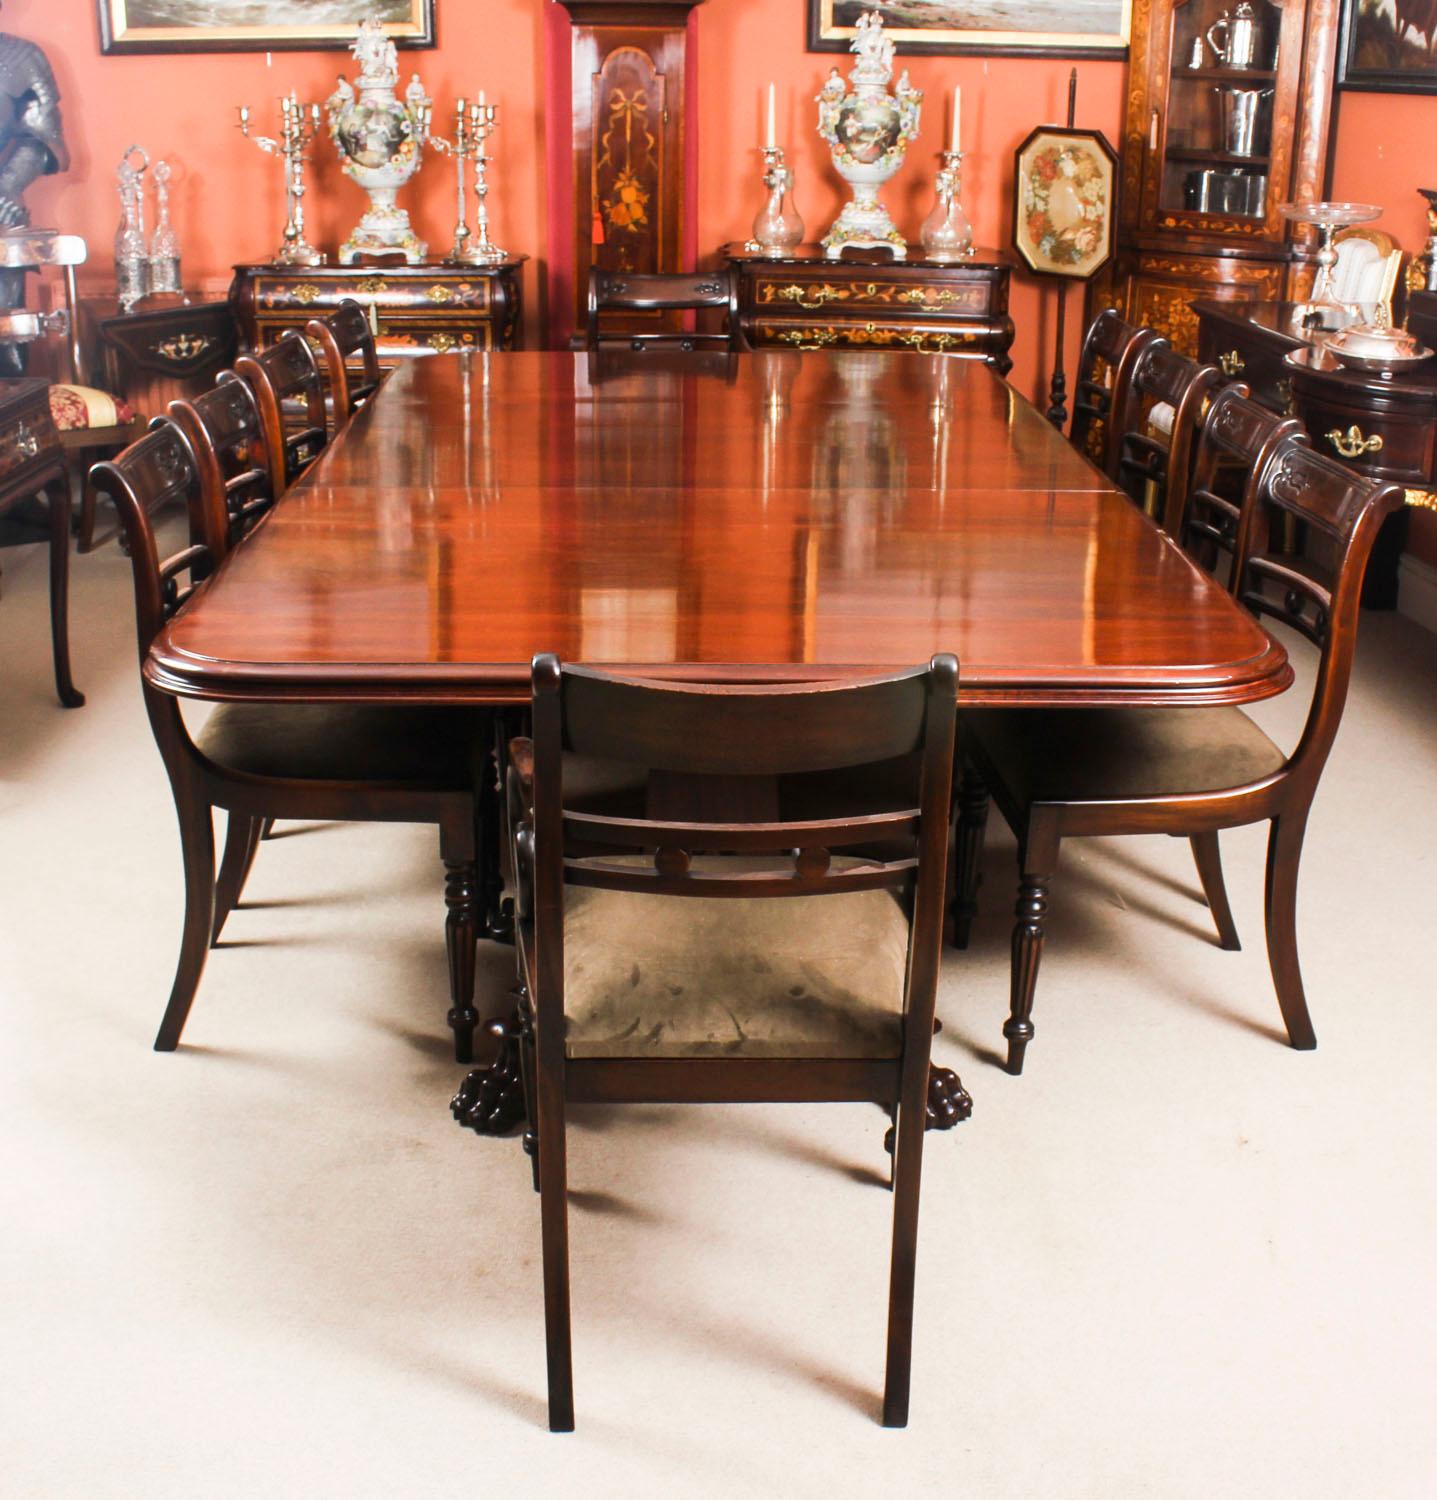 This is a beautiful dining set comprising an antique George III flame mahogany twin pedestal dining table circa 1810 in date and ten bespoke Regency style tulip back dining chairs.

The amazing table can sit ten people in comfort and will stretch